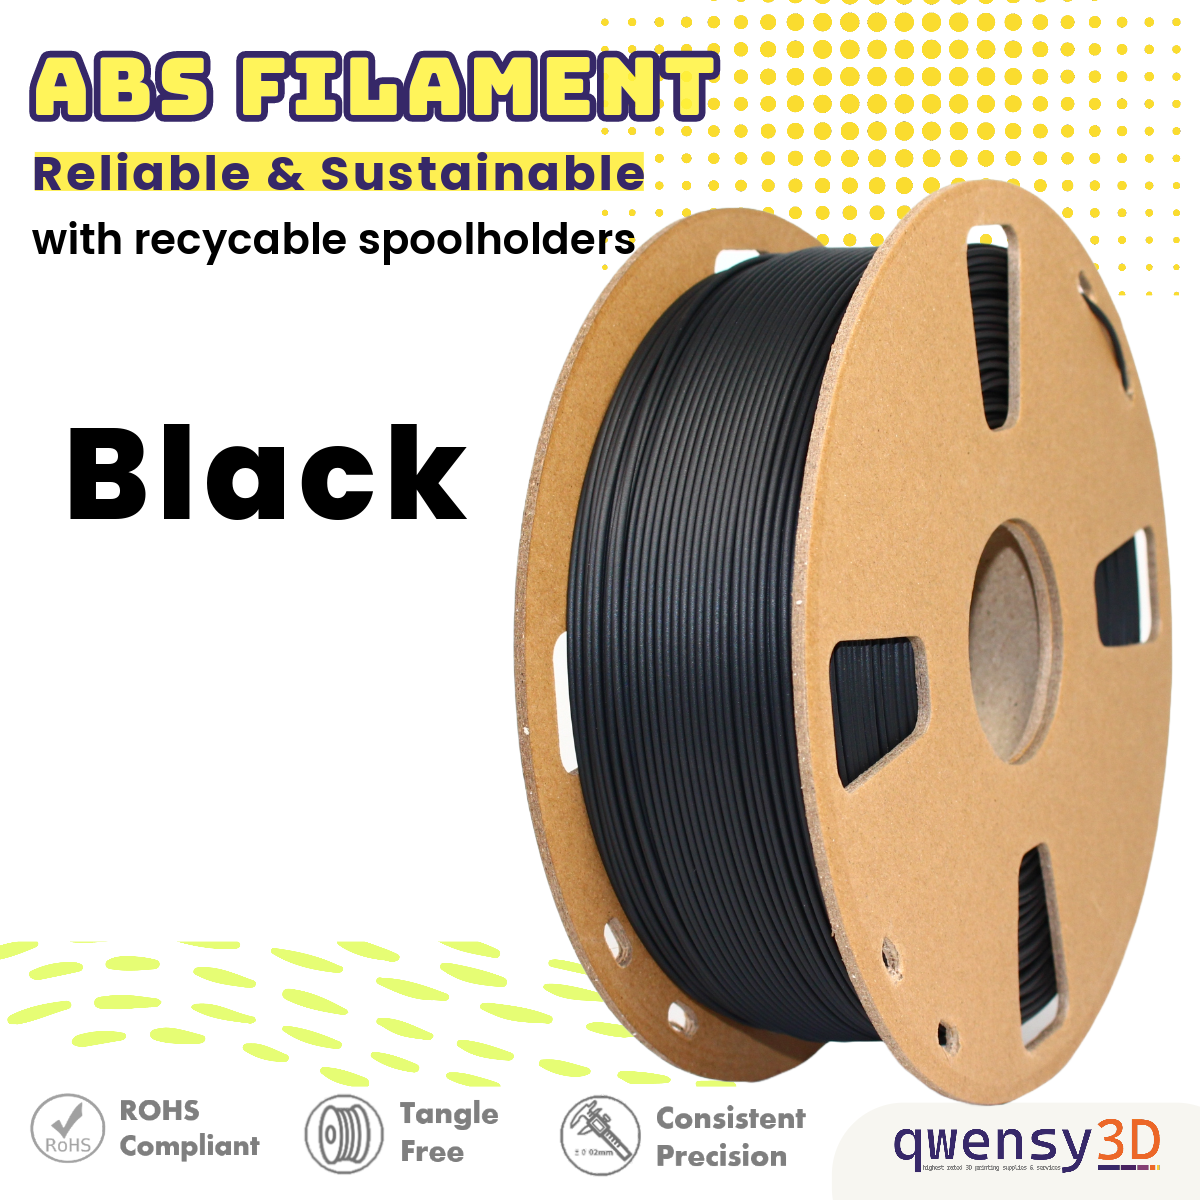 qwensy ABS Filament for 3D Printing- Strong, Sturdy, and Sustainable Filament for Quality Print Results